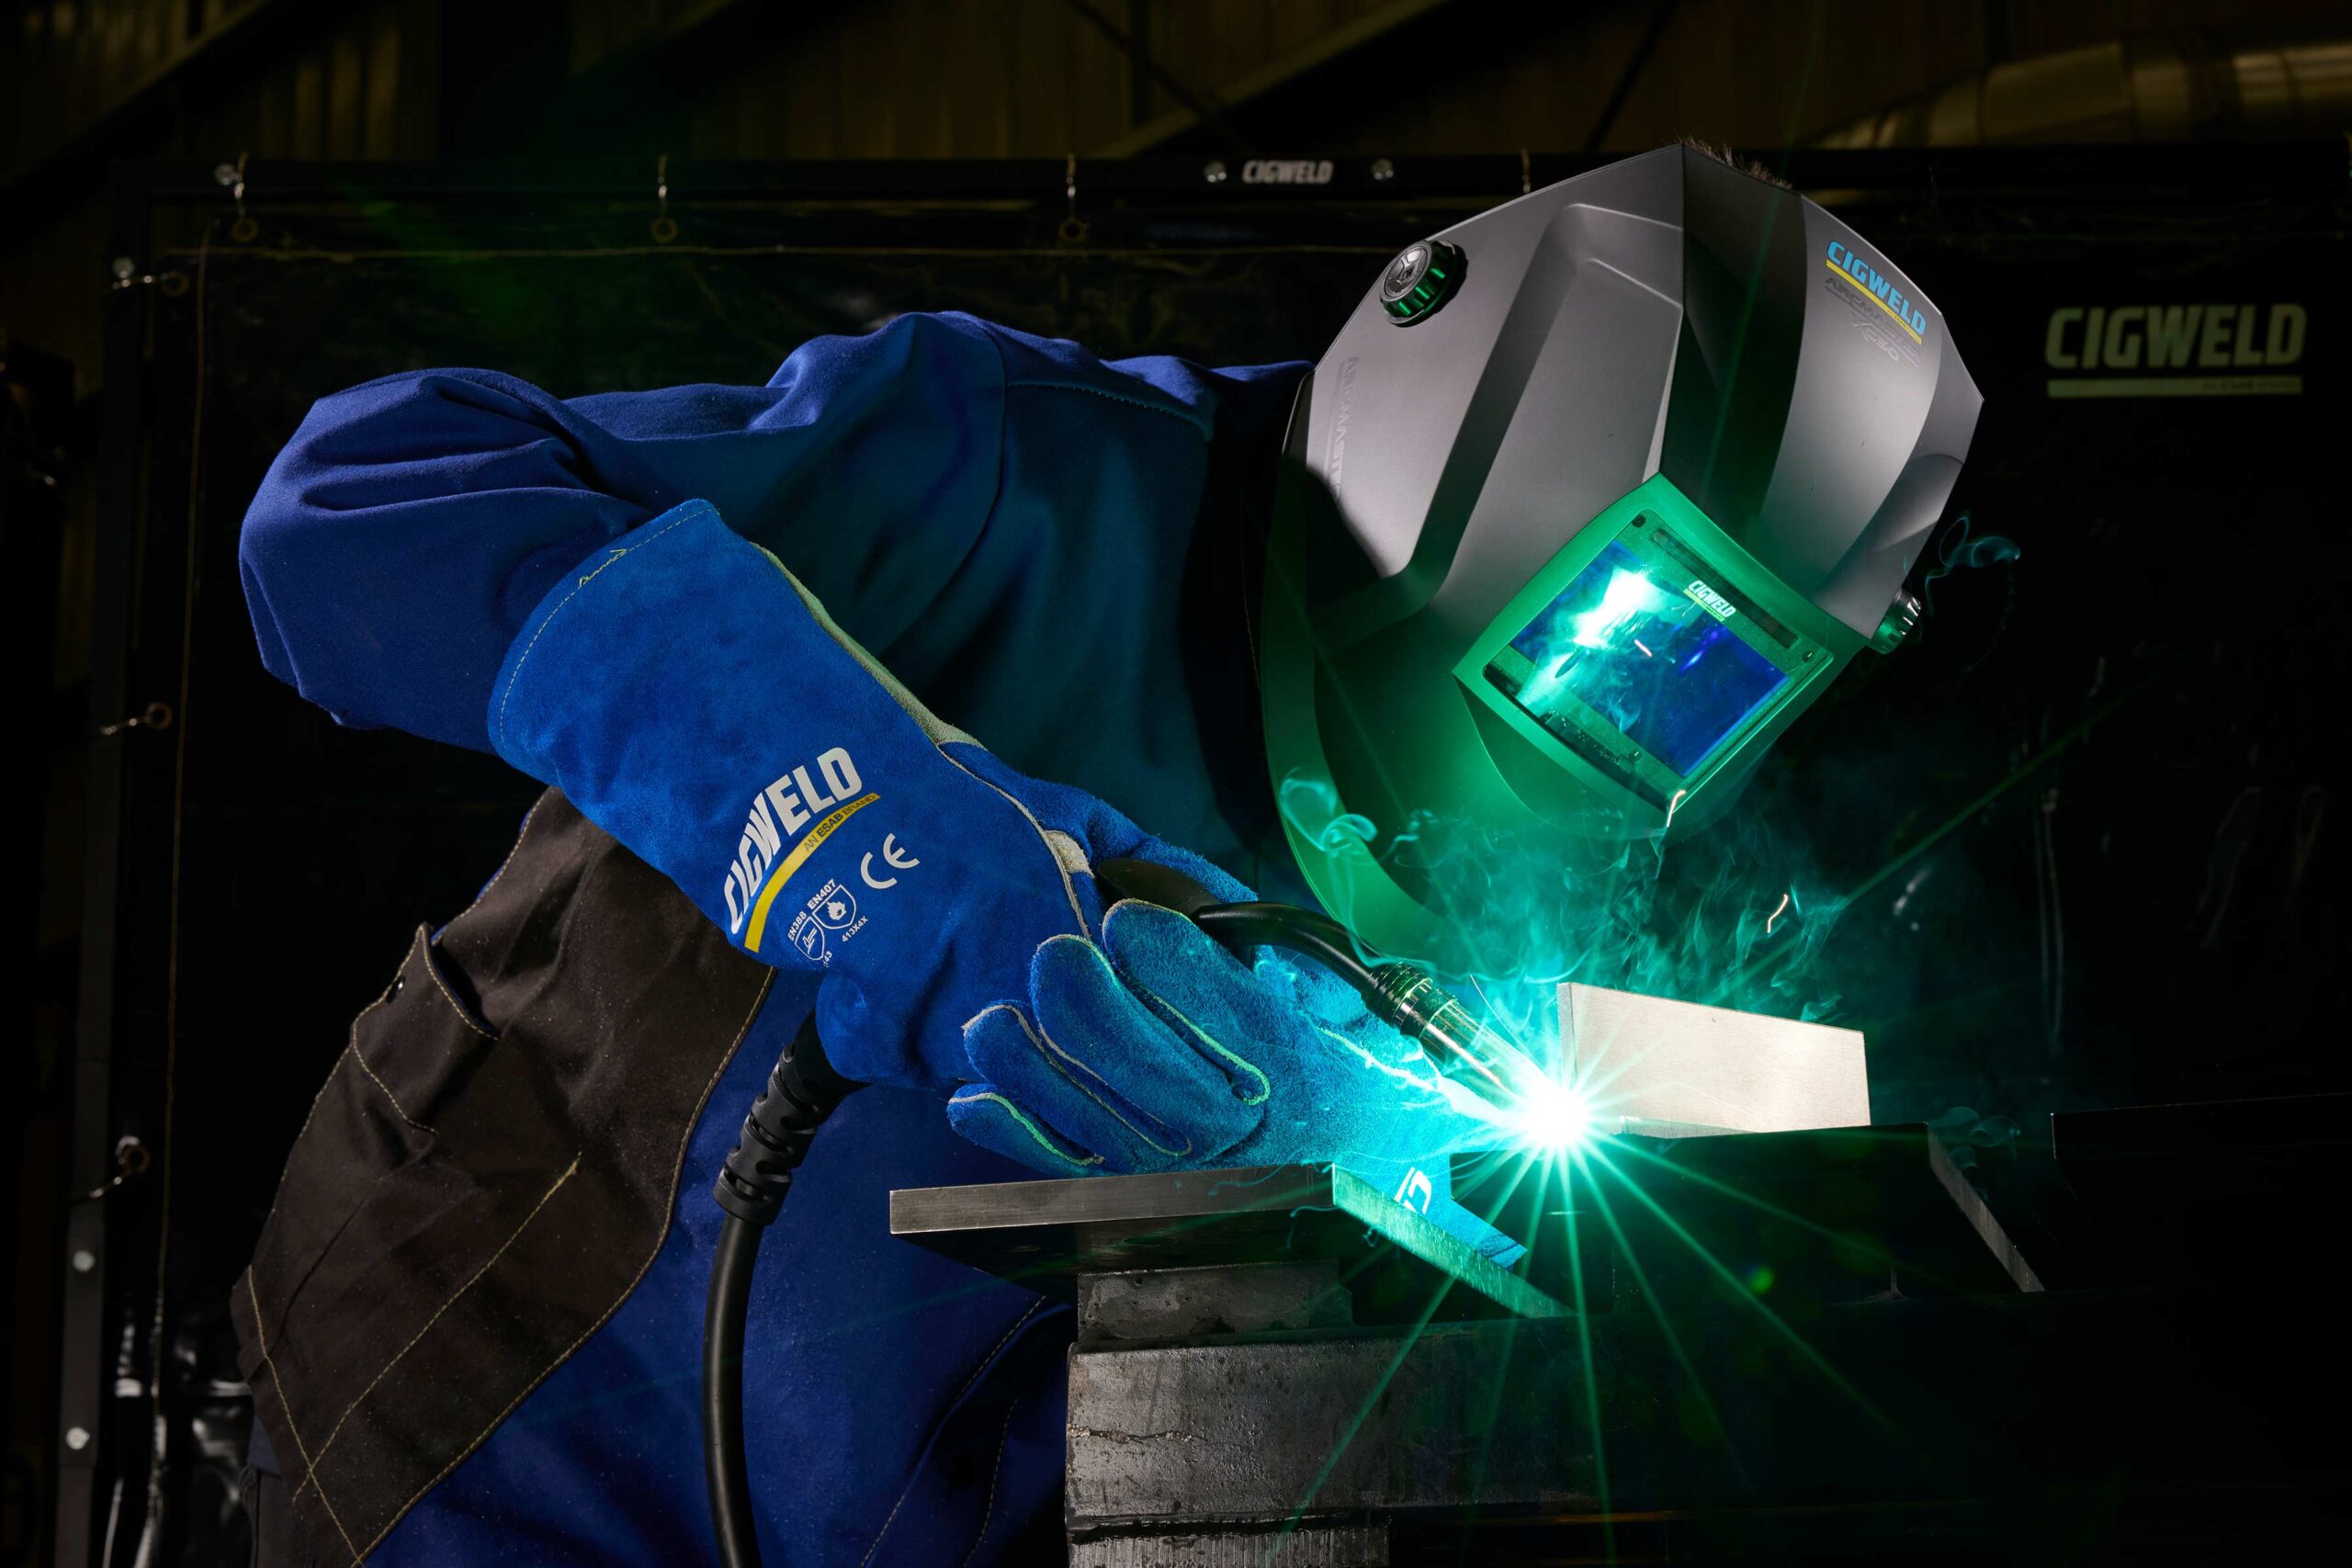 A welder work on a piece of metal at workbench with full protective gear on, including a helmet on a construction site.